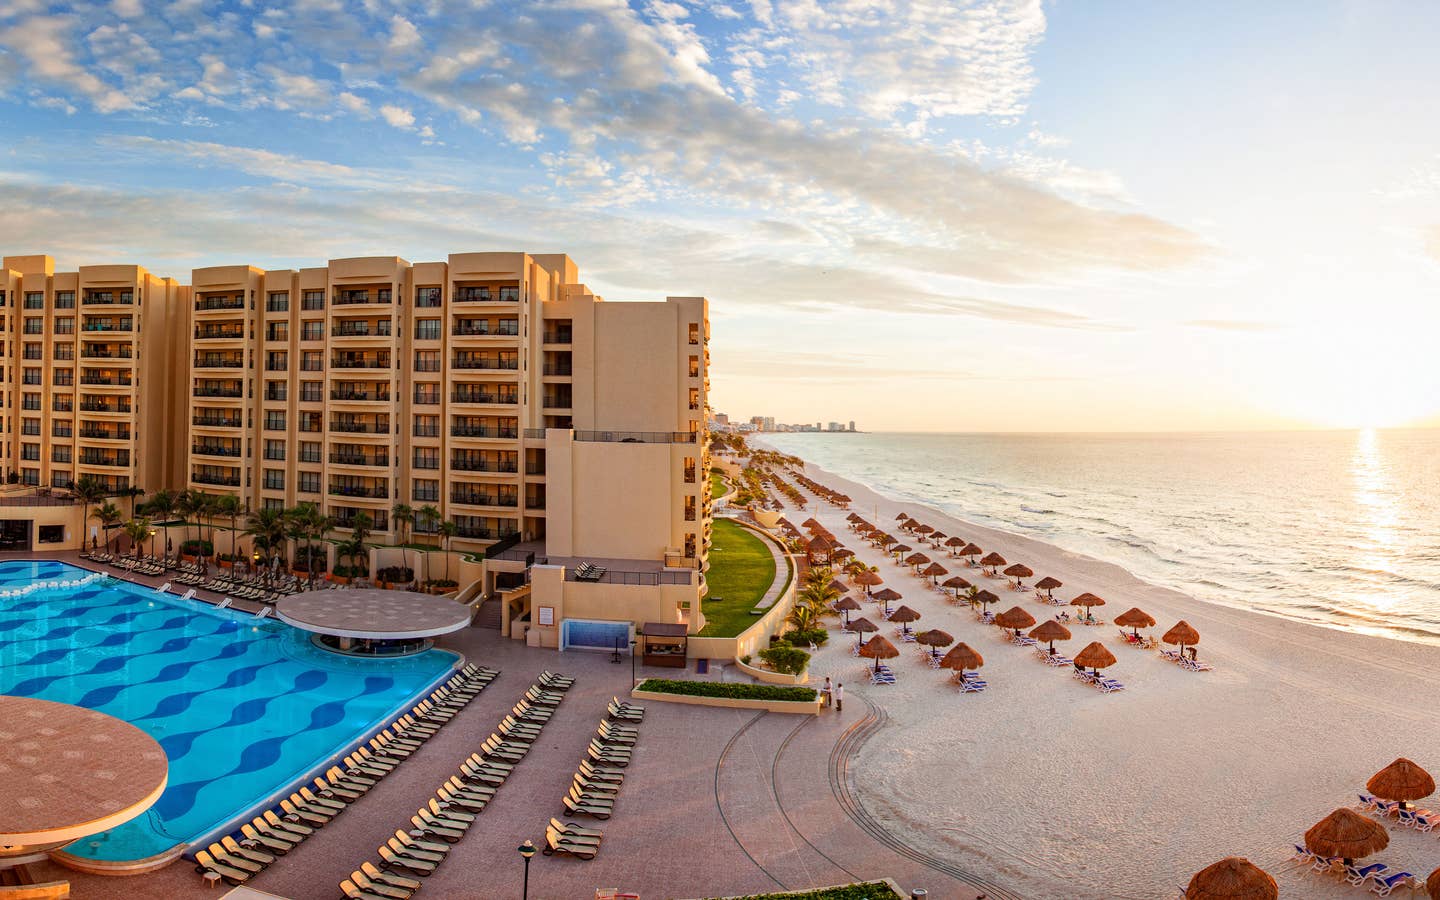 Amazing aerial view at sunset of Royal Sands Resort in Cancun, Mexico.